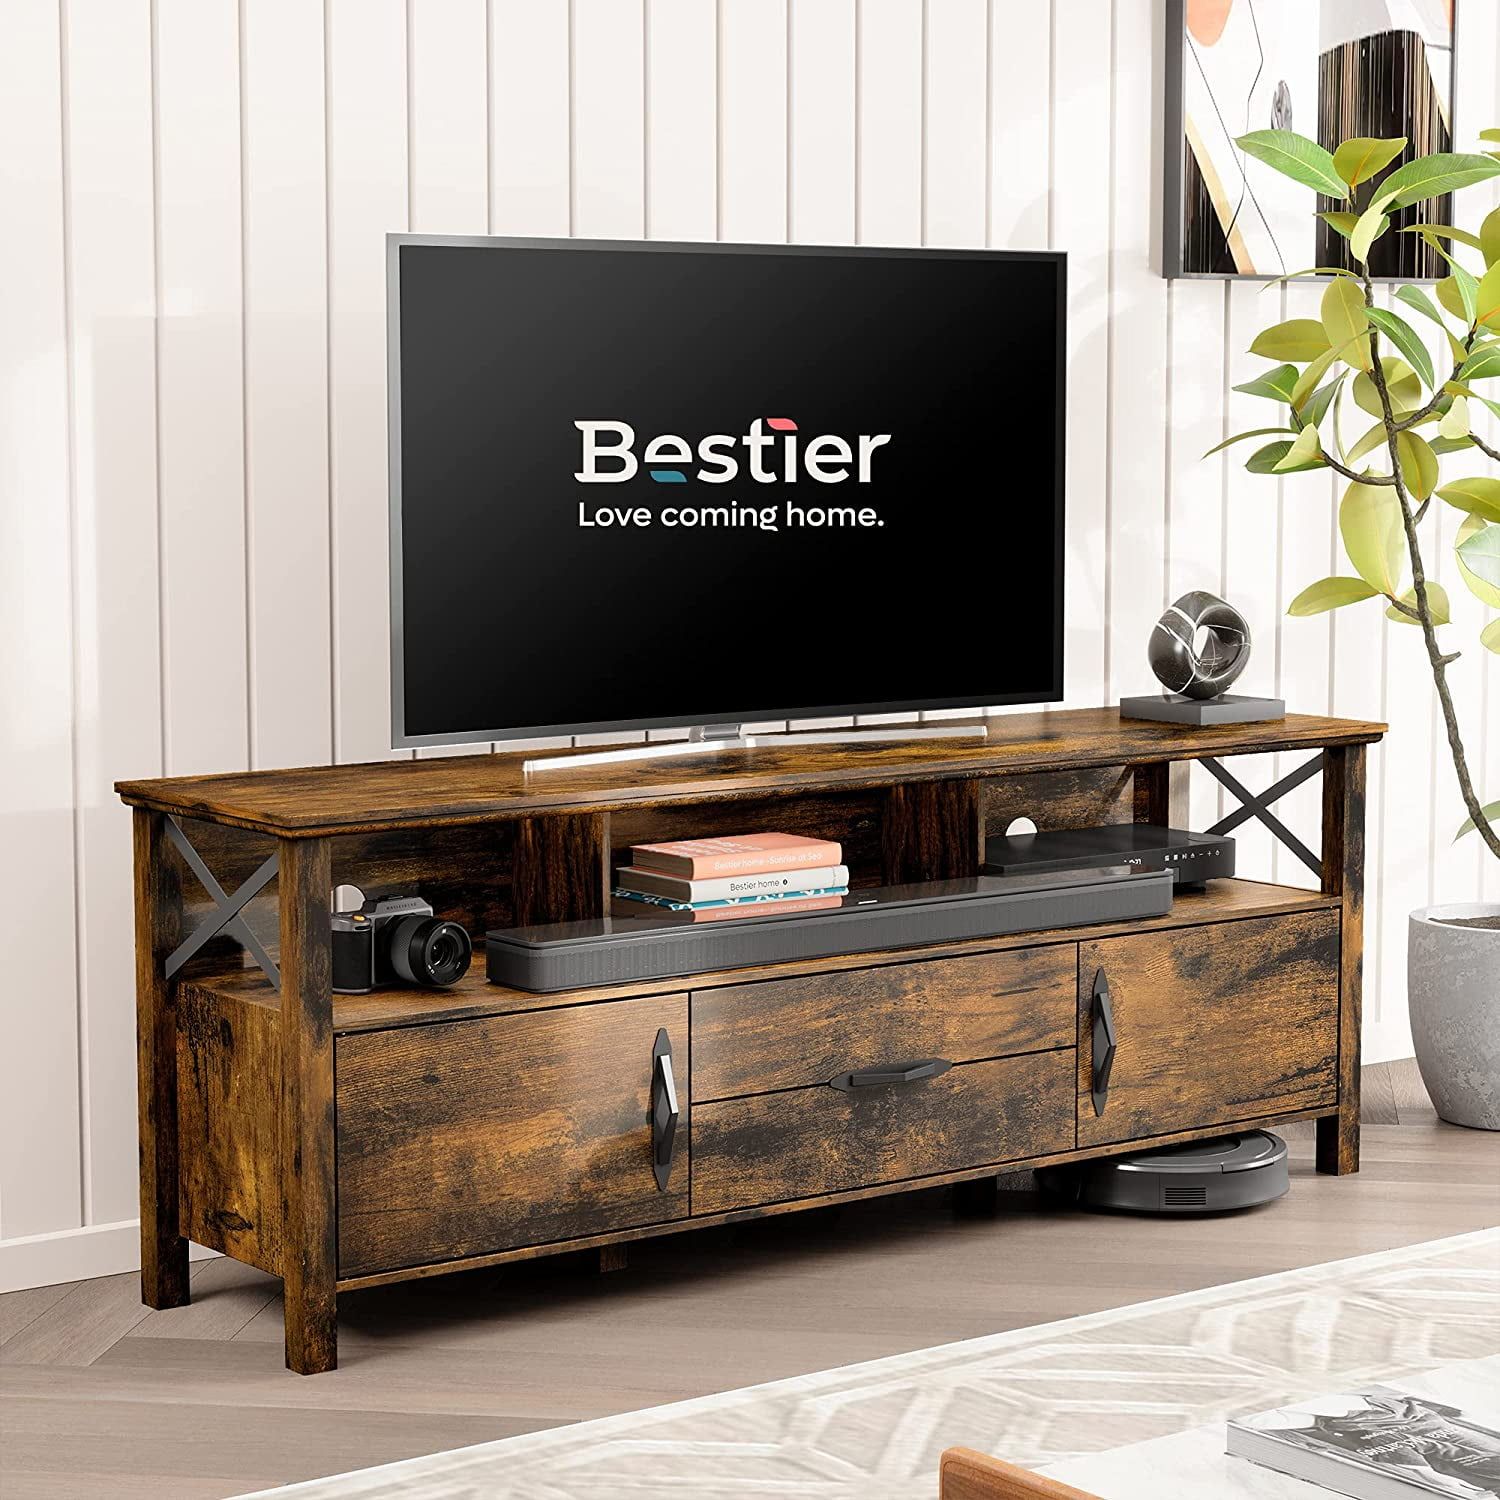 Bestier Tv Stand For Tv Up To 70 Inch, Tv Cabinet With Wooden Drawer With Regard To Dual Use Storage Cabinet Tv Stands (Gallery 3 of 20)